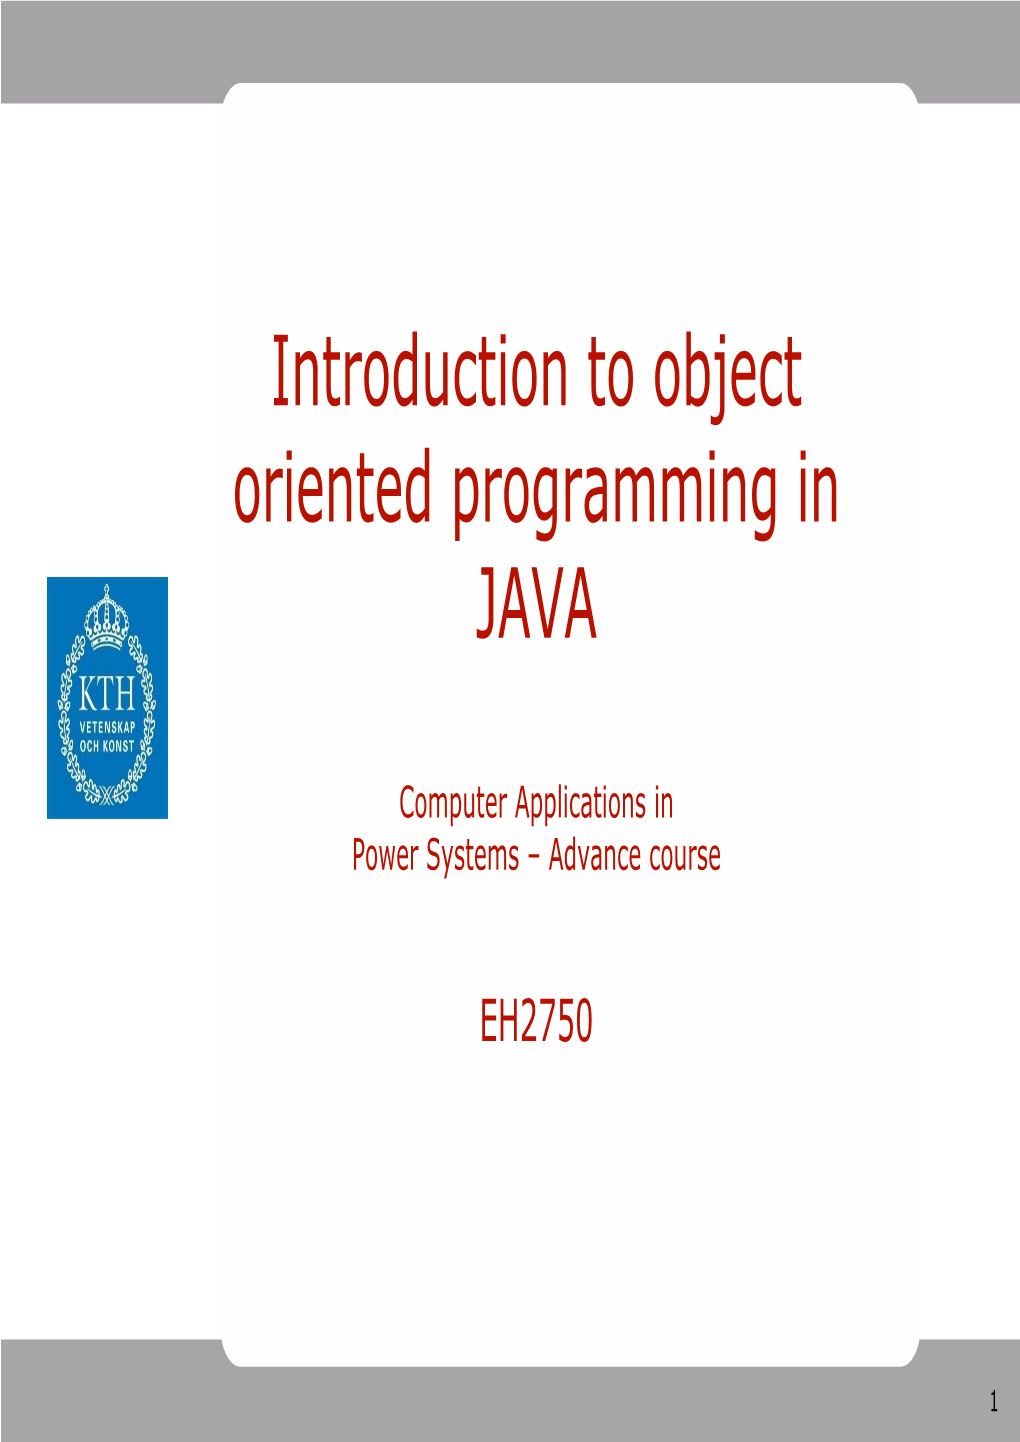 Introduction to Object Oriented Programming in JAVA